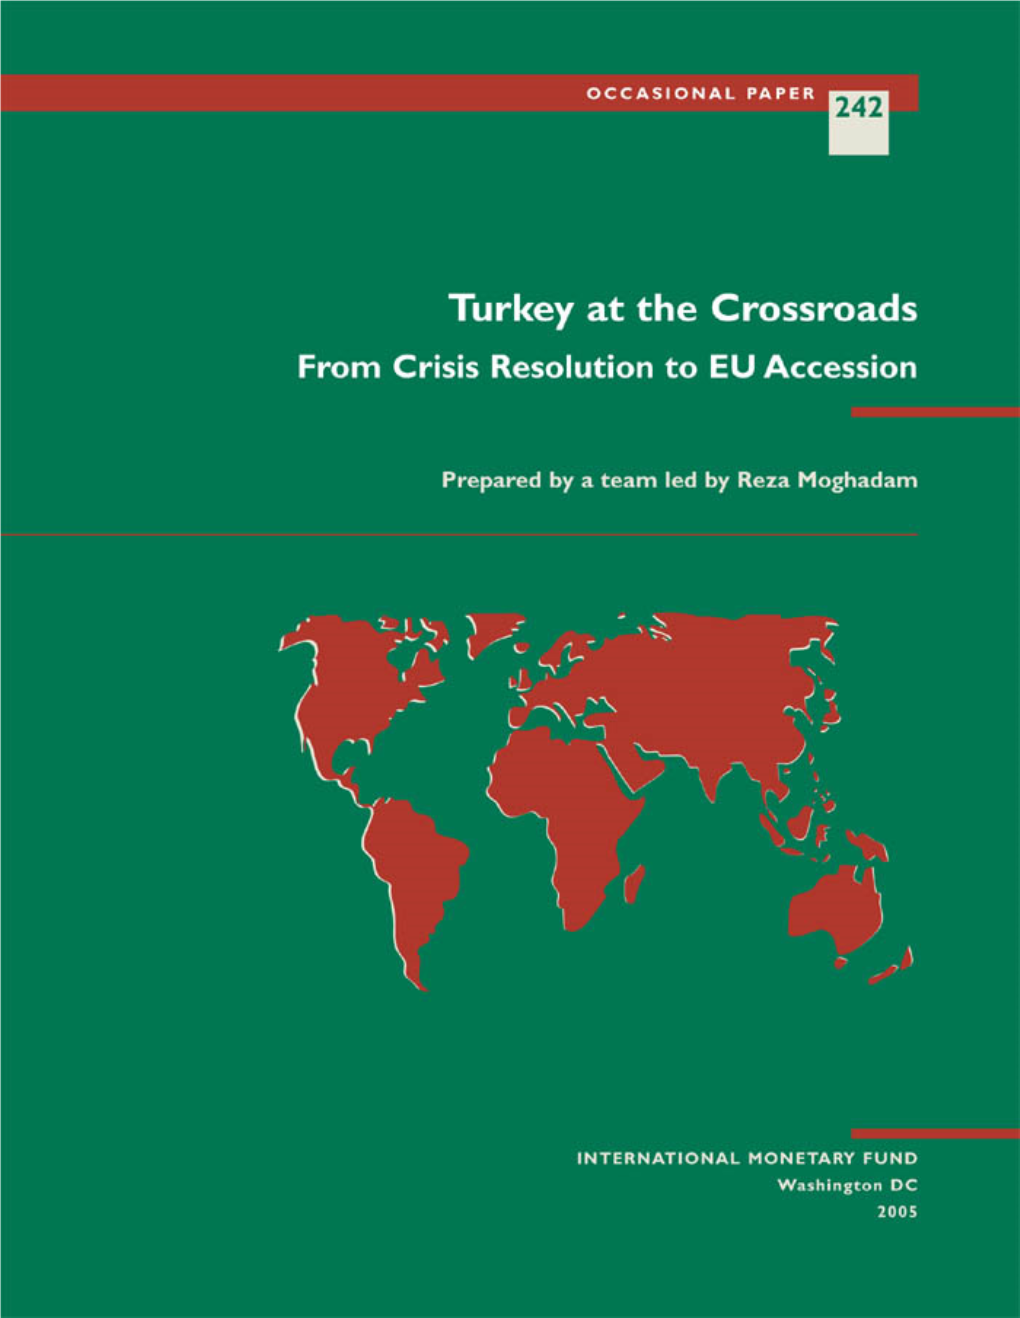 Turkey at the Crossroads from Crisis Resolution to EU Accession